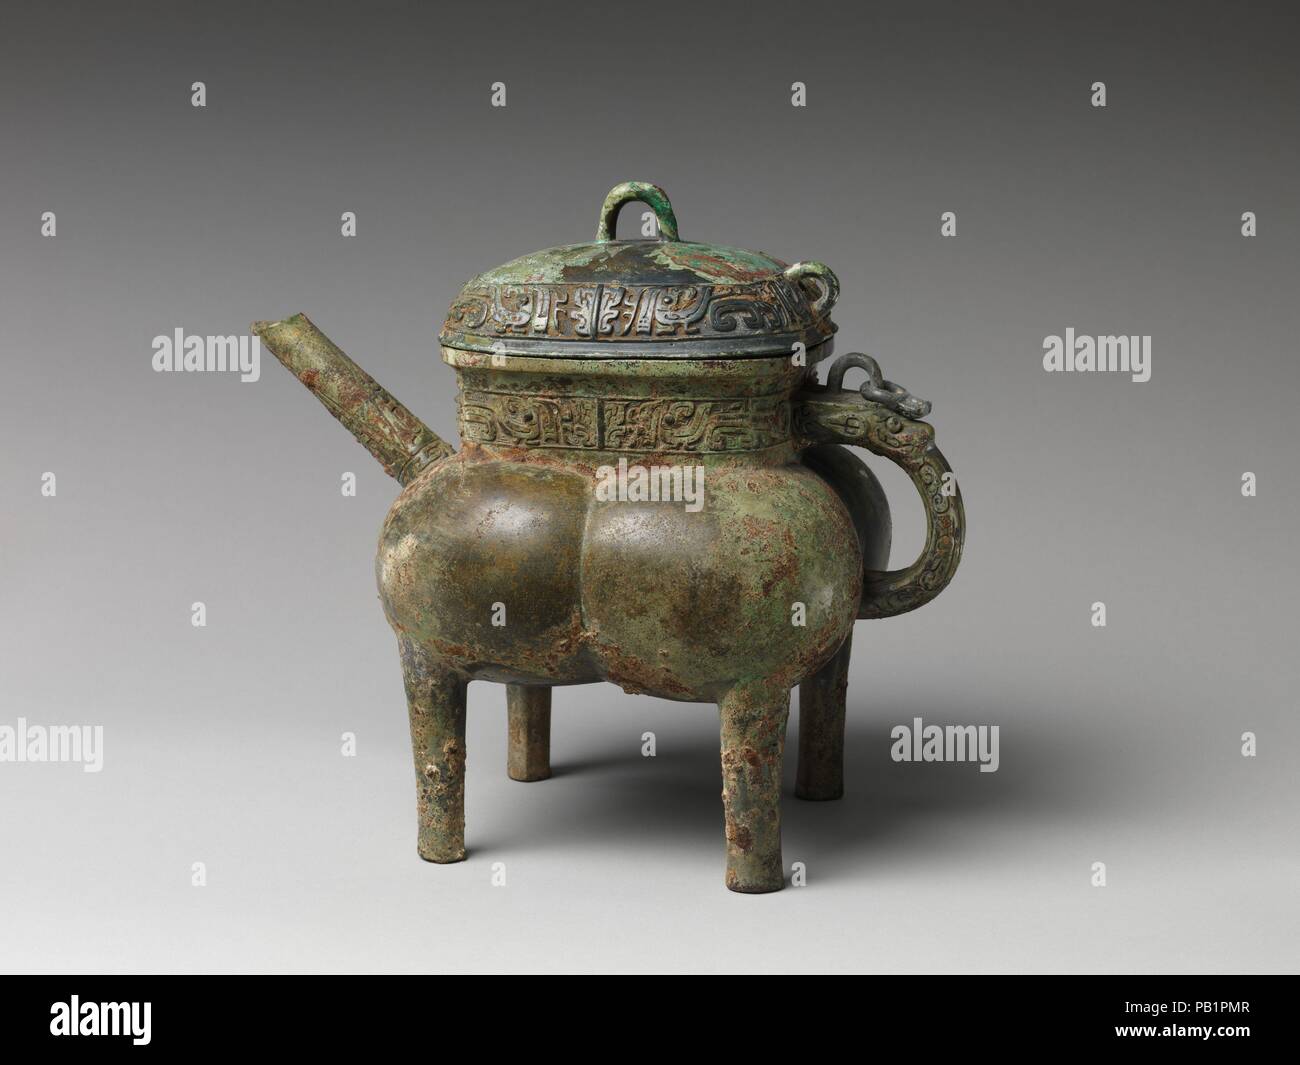 Spouted Wine Vessel (He). Artist: Yin Lingde (Chinese). Culture: China. Dimensions: H. 10 3/4 in. (27.3 cm); W. 7 3/4 in. (19.7 cm); L. (with spout and handle)  12 1/4 in. (31.1 cm). Date: 12th-11th century BC. Museum: Metropolitan Museum of Art, New York, USA. Stock Photo